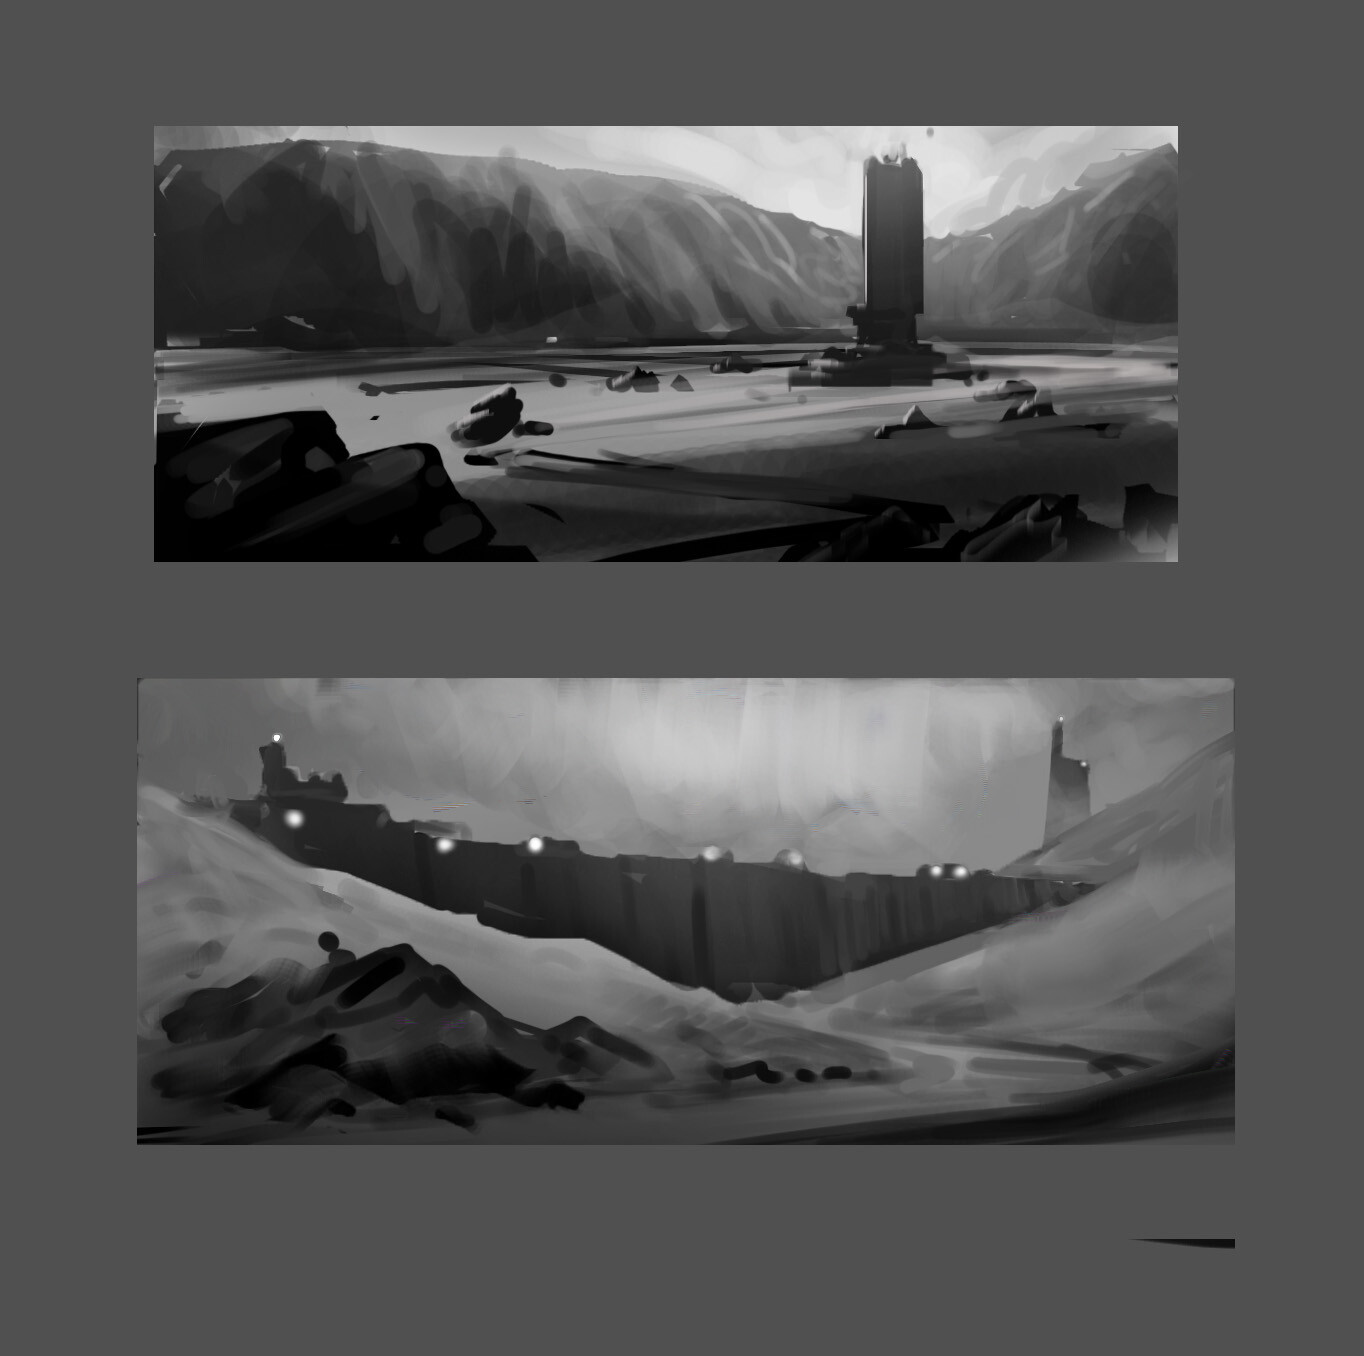 initial comps and sketches